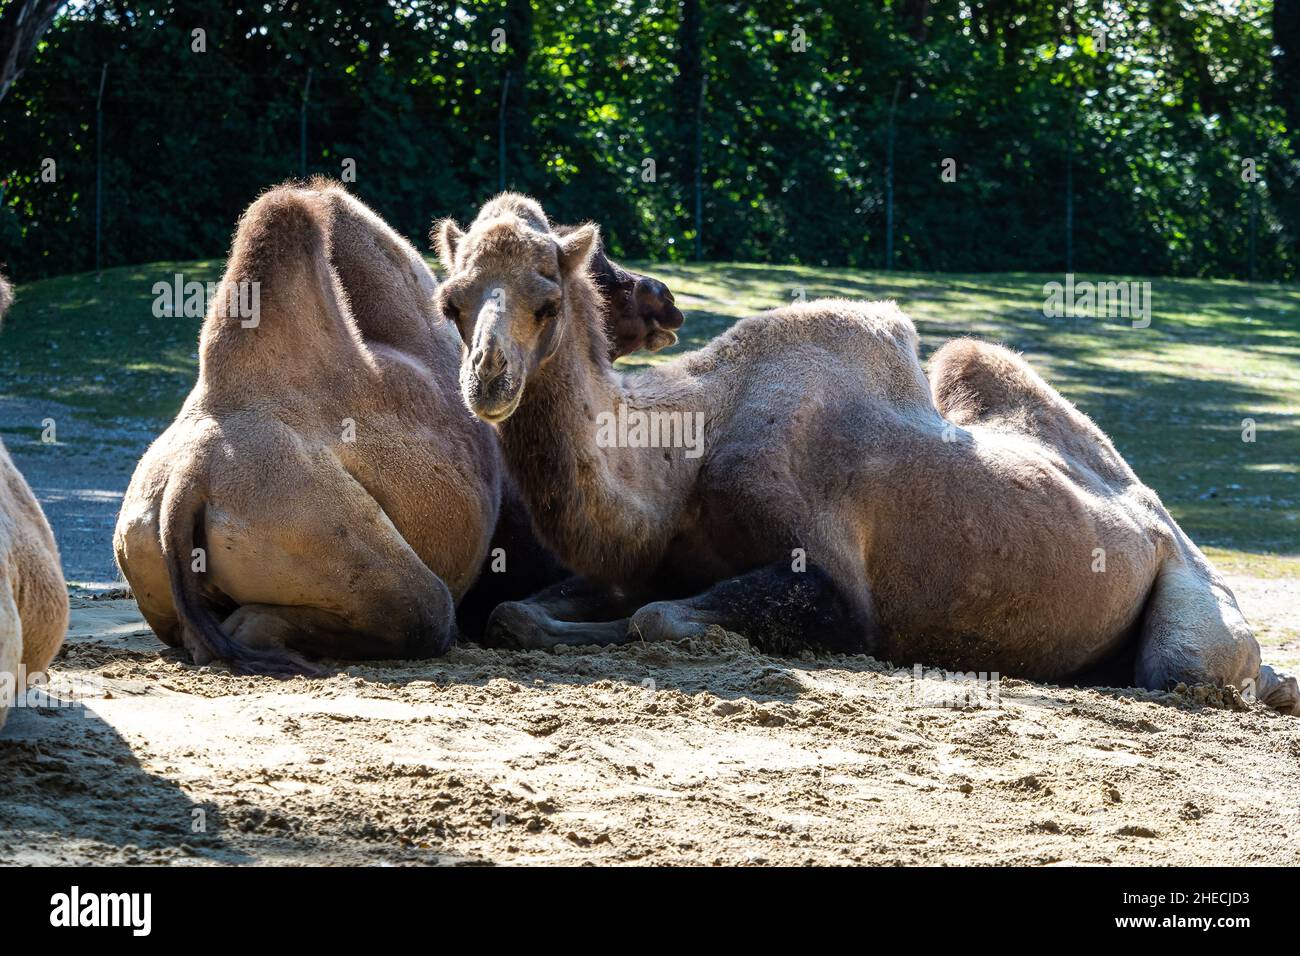 The Bactrian camels, Camelus bactrianus is a large, even-toed ungulate ...